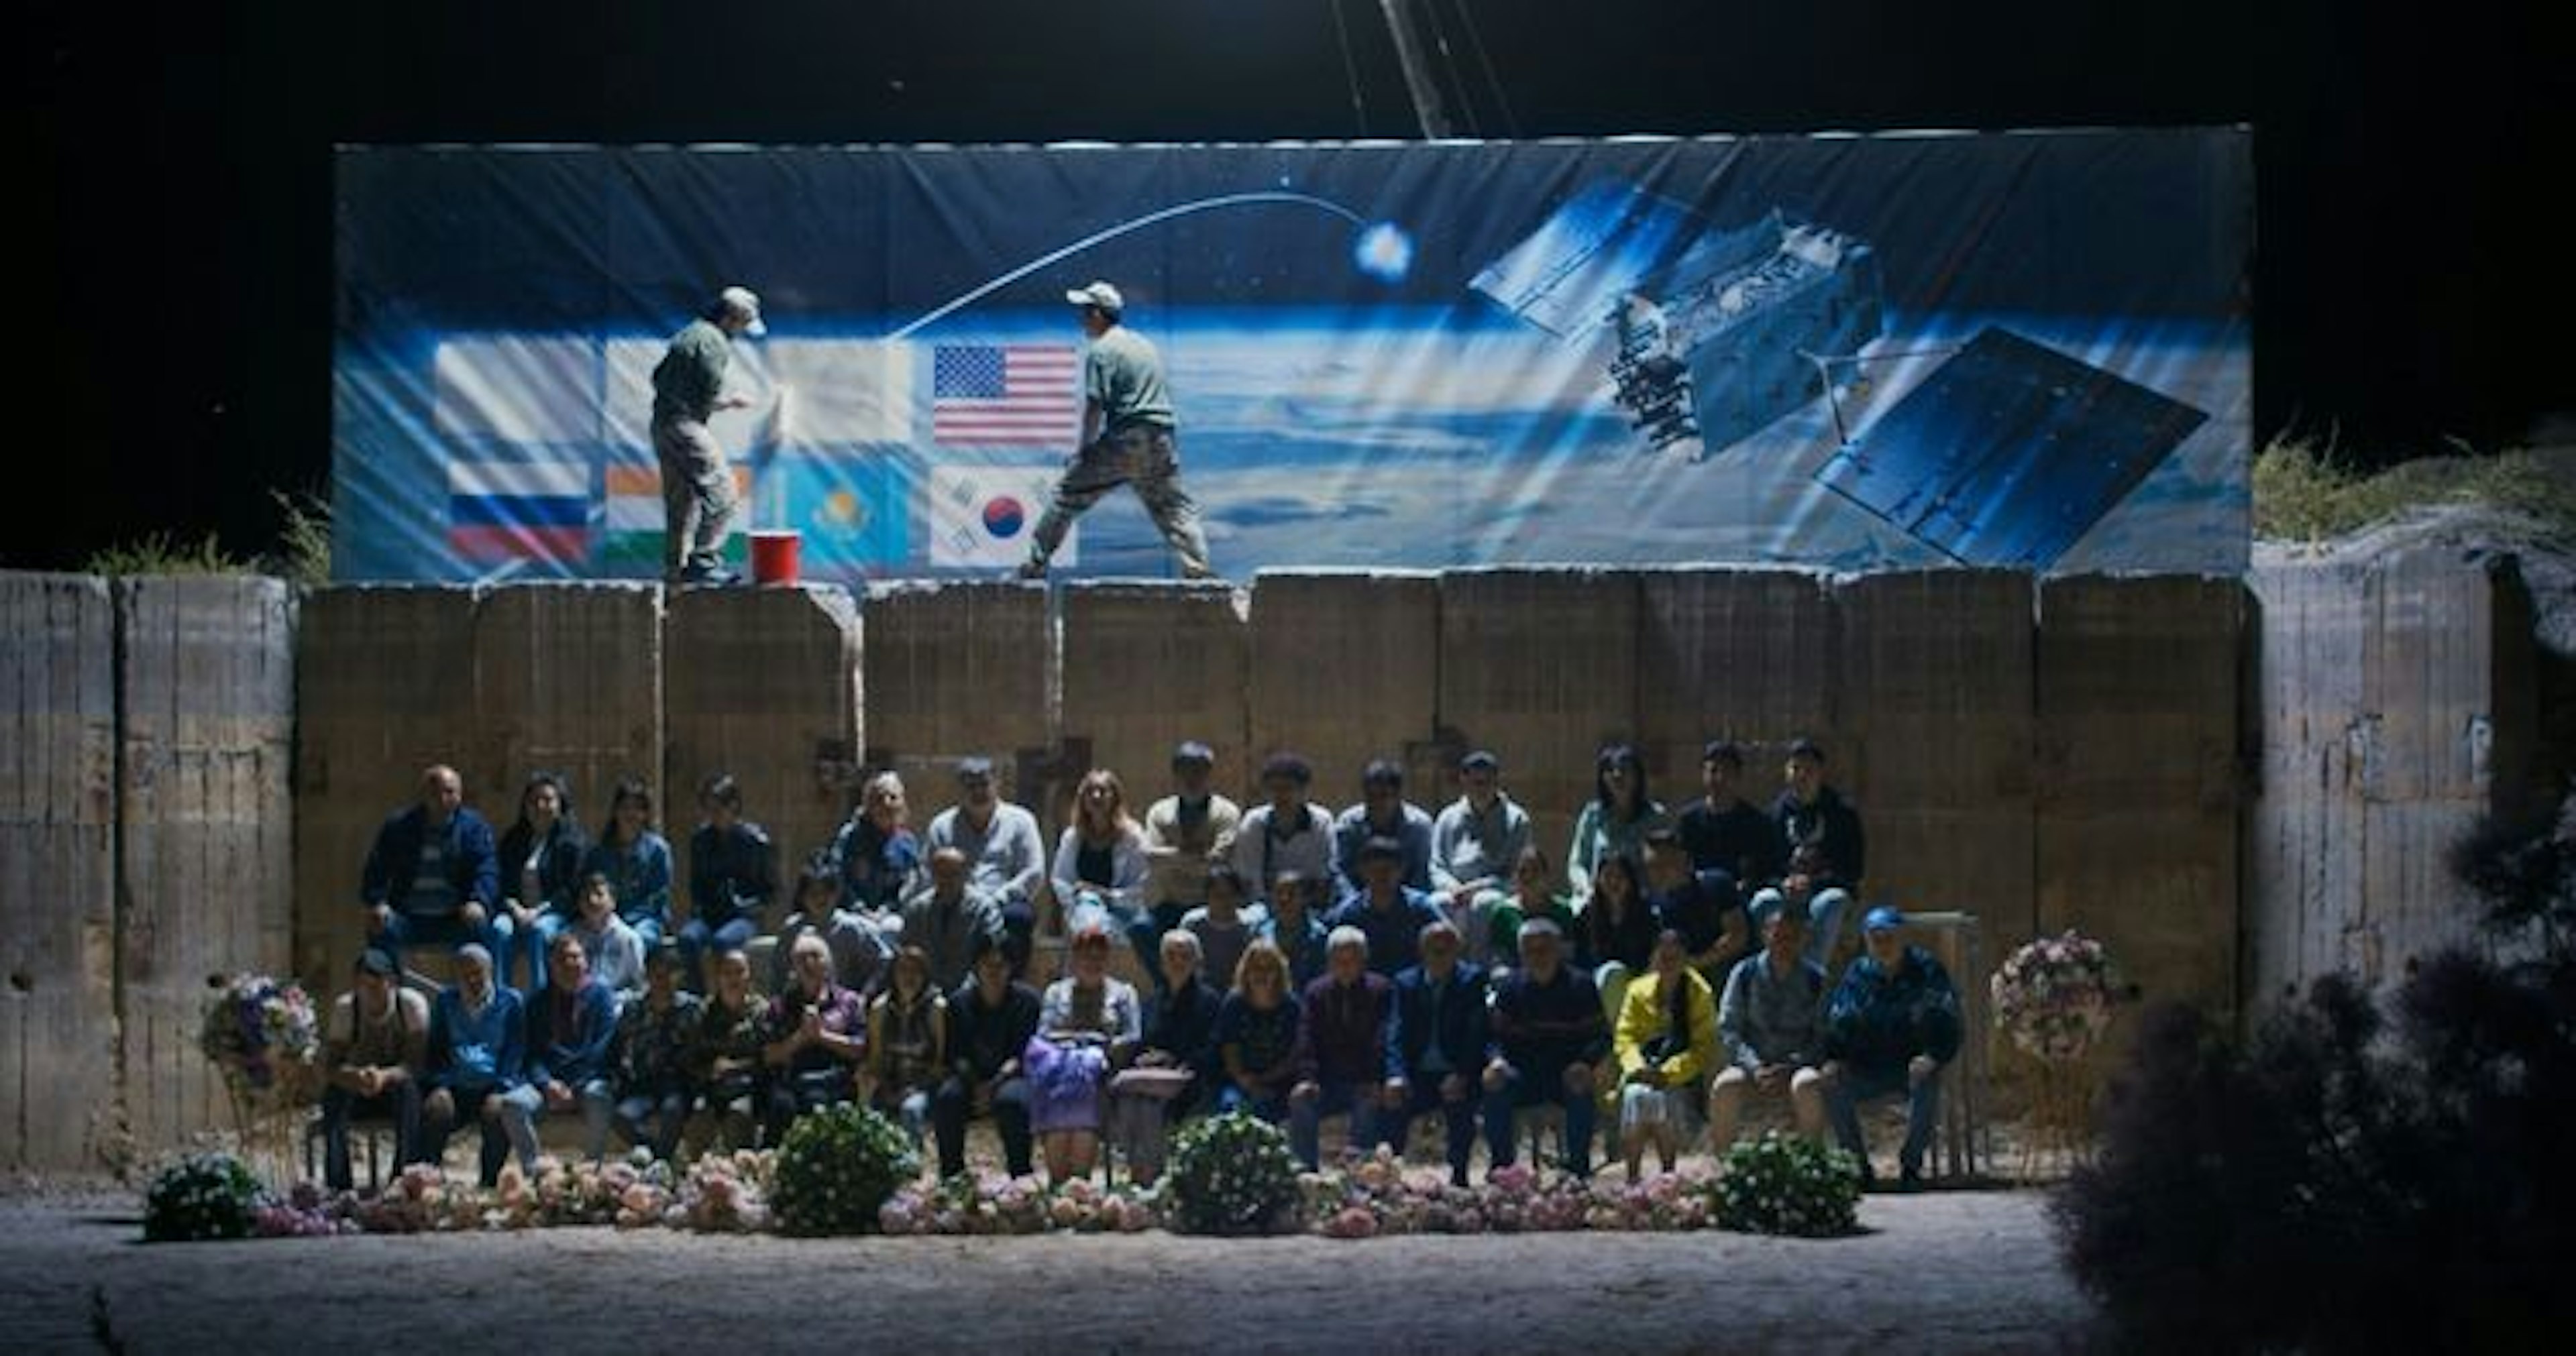 A group of people sitting on bleachers viewing a rocket launch at night, while men stand on a wall above the group painting over the flags of countries. 